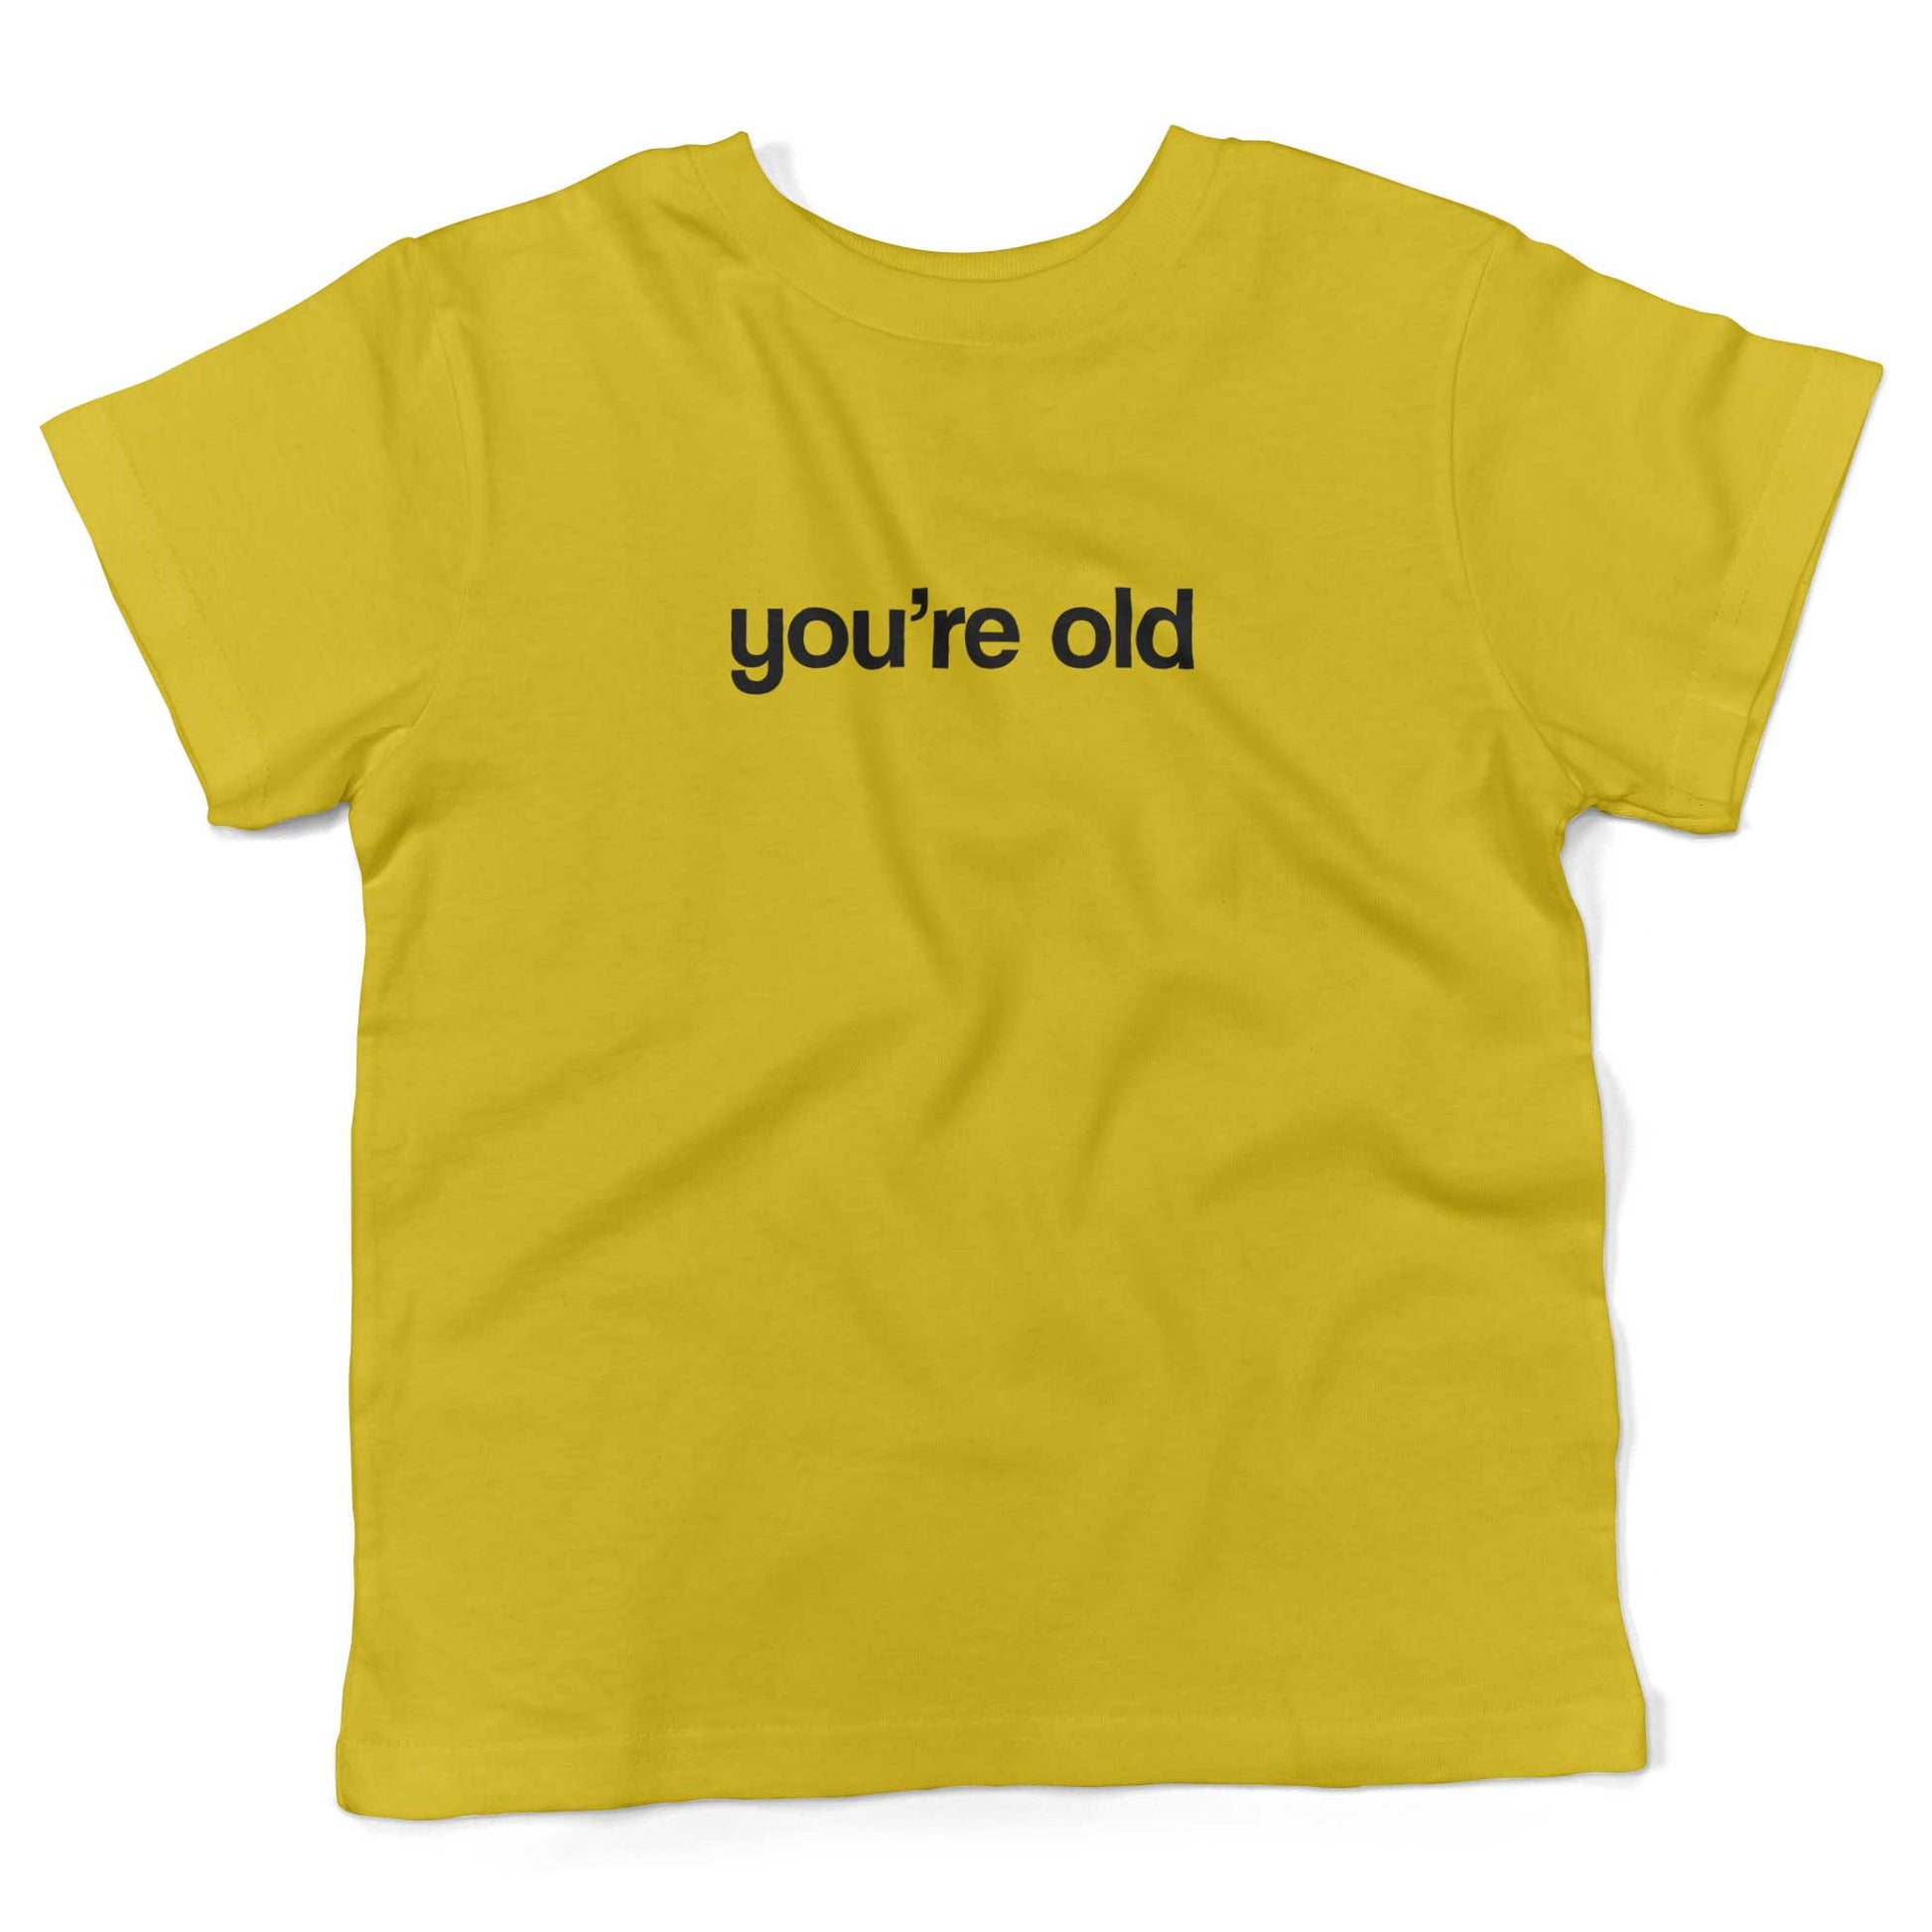 You're Old Toddler Shirt-Sunshine Yellow-2T